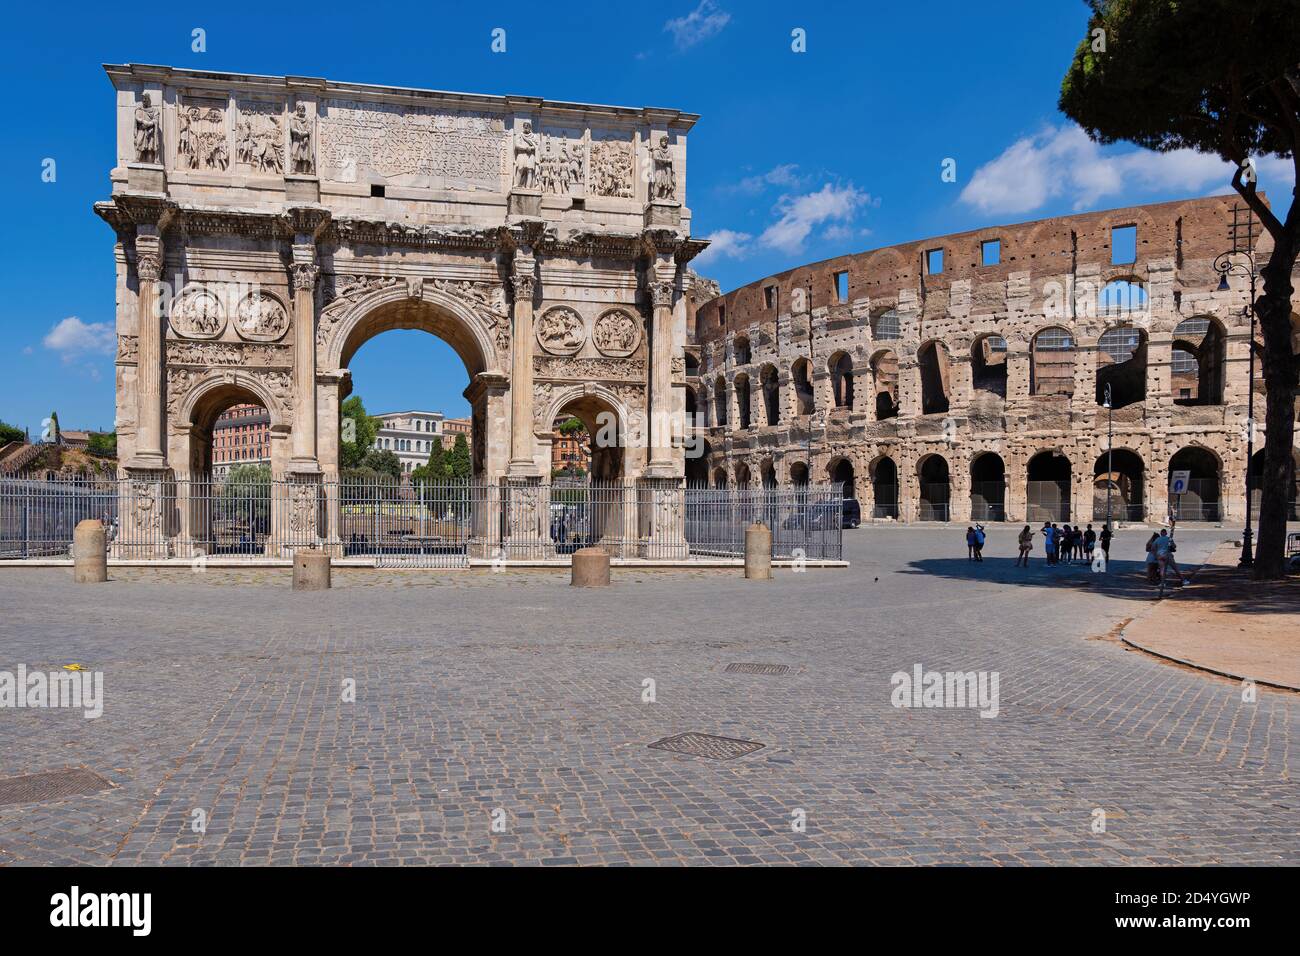 Arch of Constantine and Colosseum in city of Rome, Italy. Ancient city landmarks from Piazza del Arco di Costantino square. Stock Photo